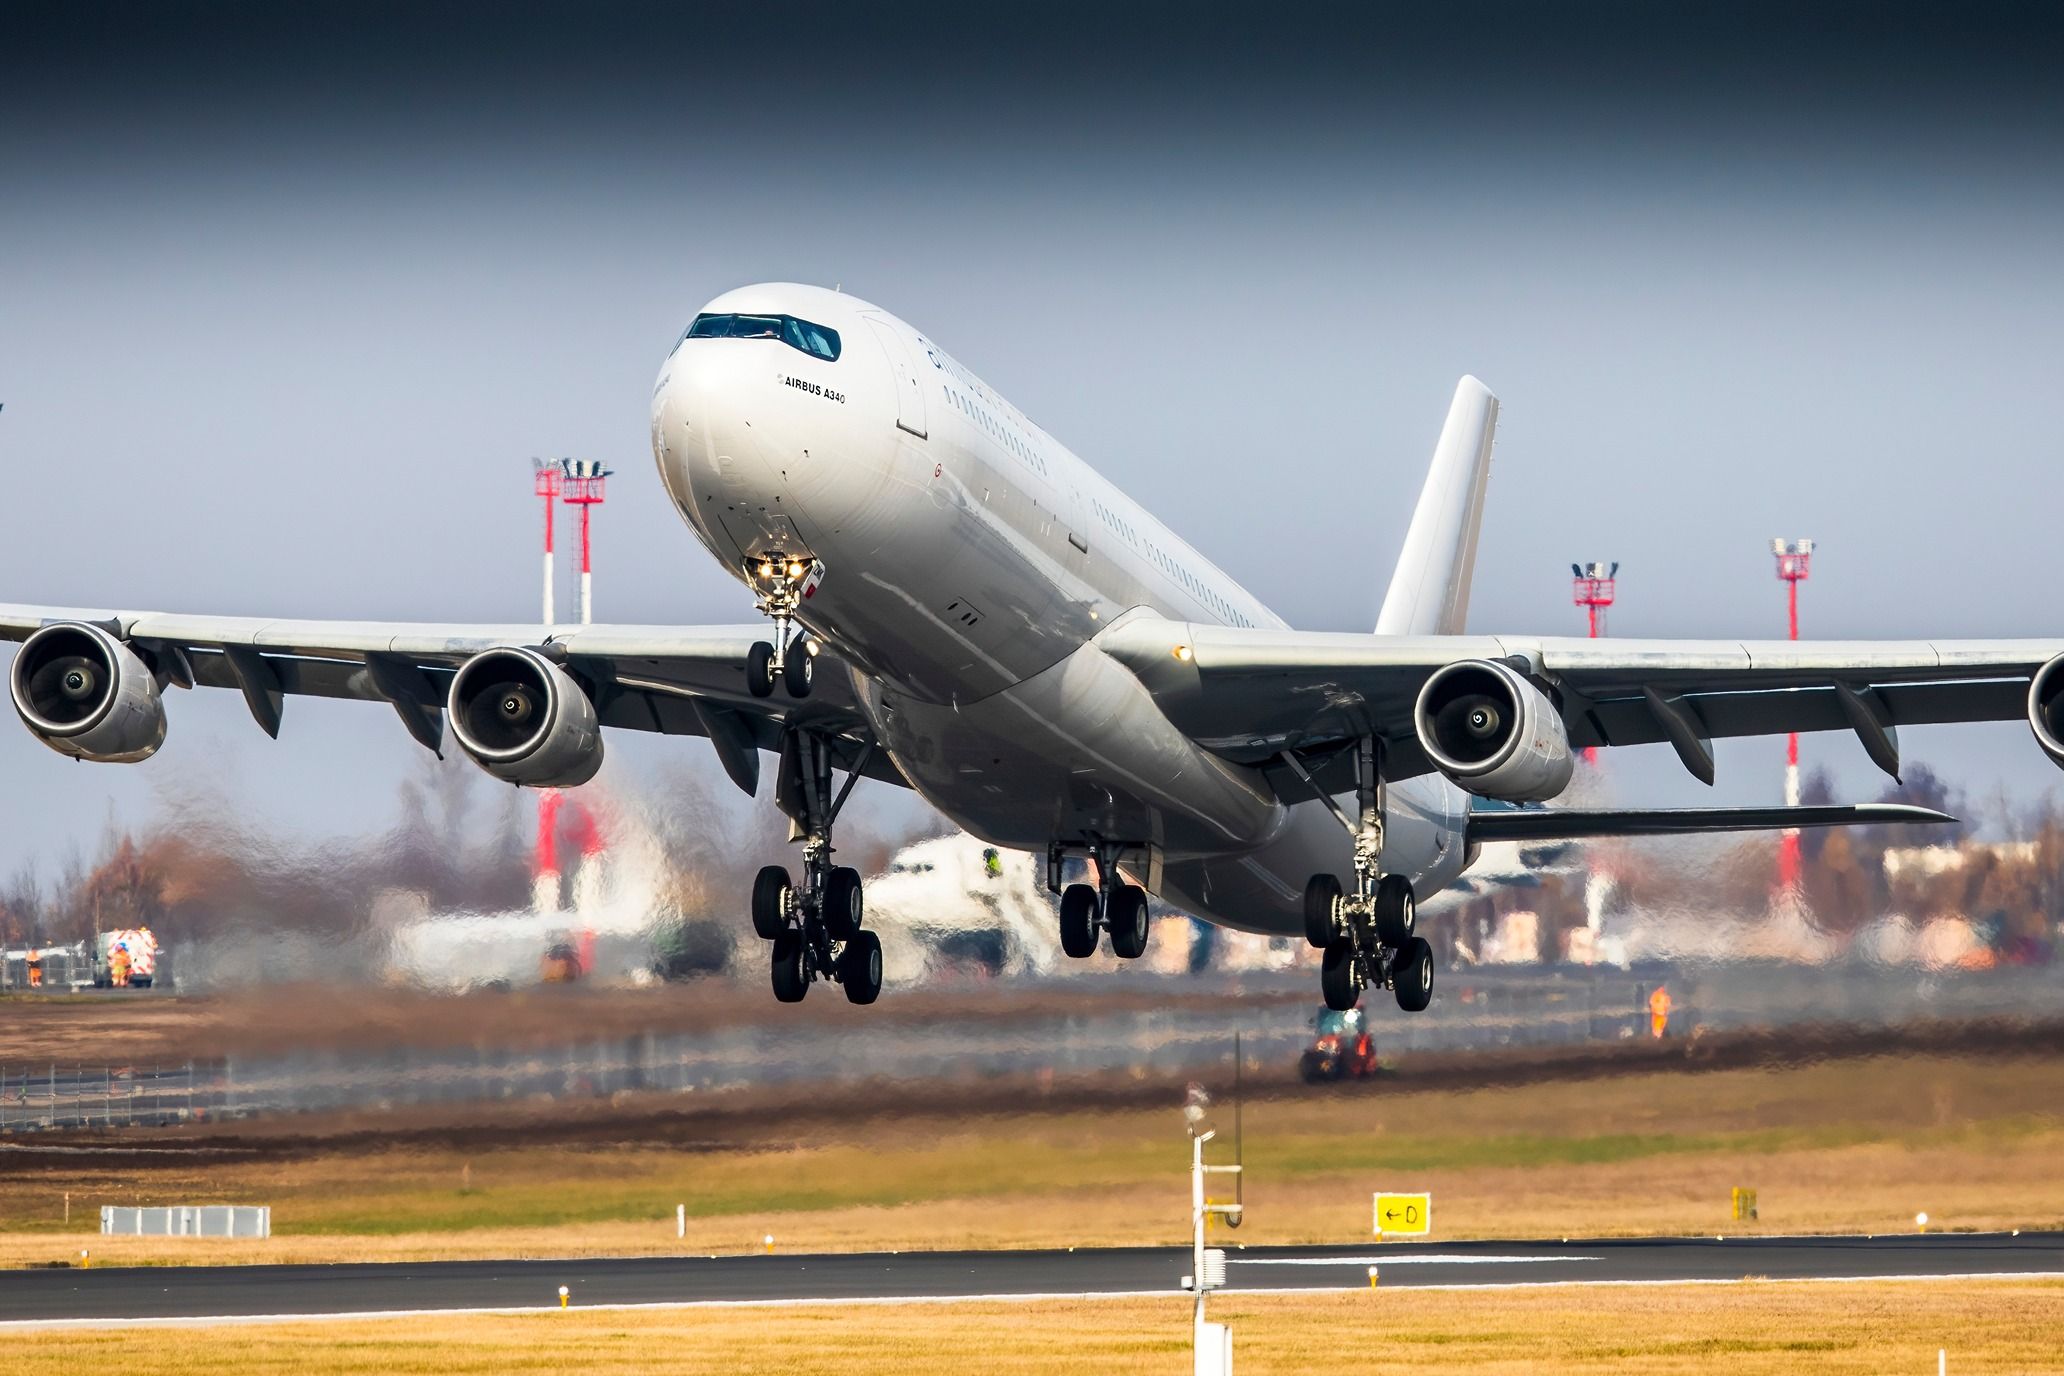 An All-white Airbus A340 taking off from an airport.